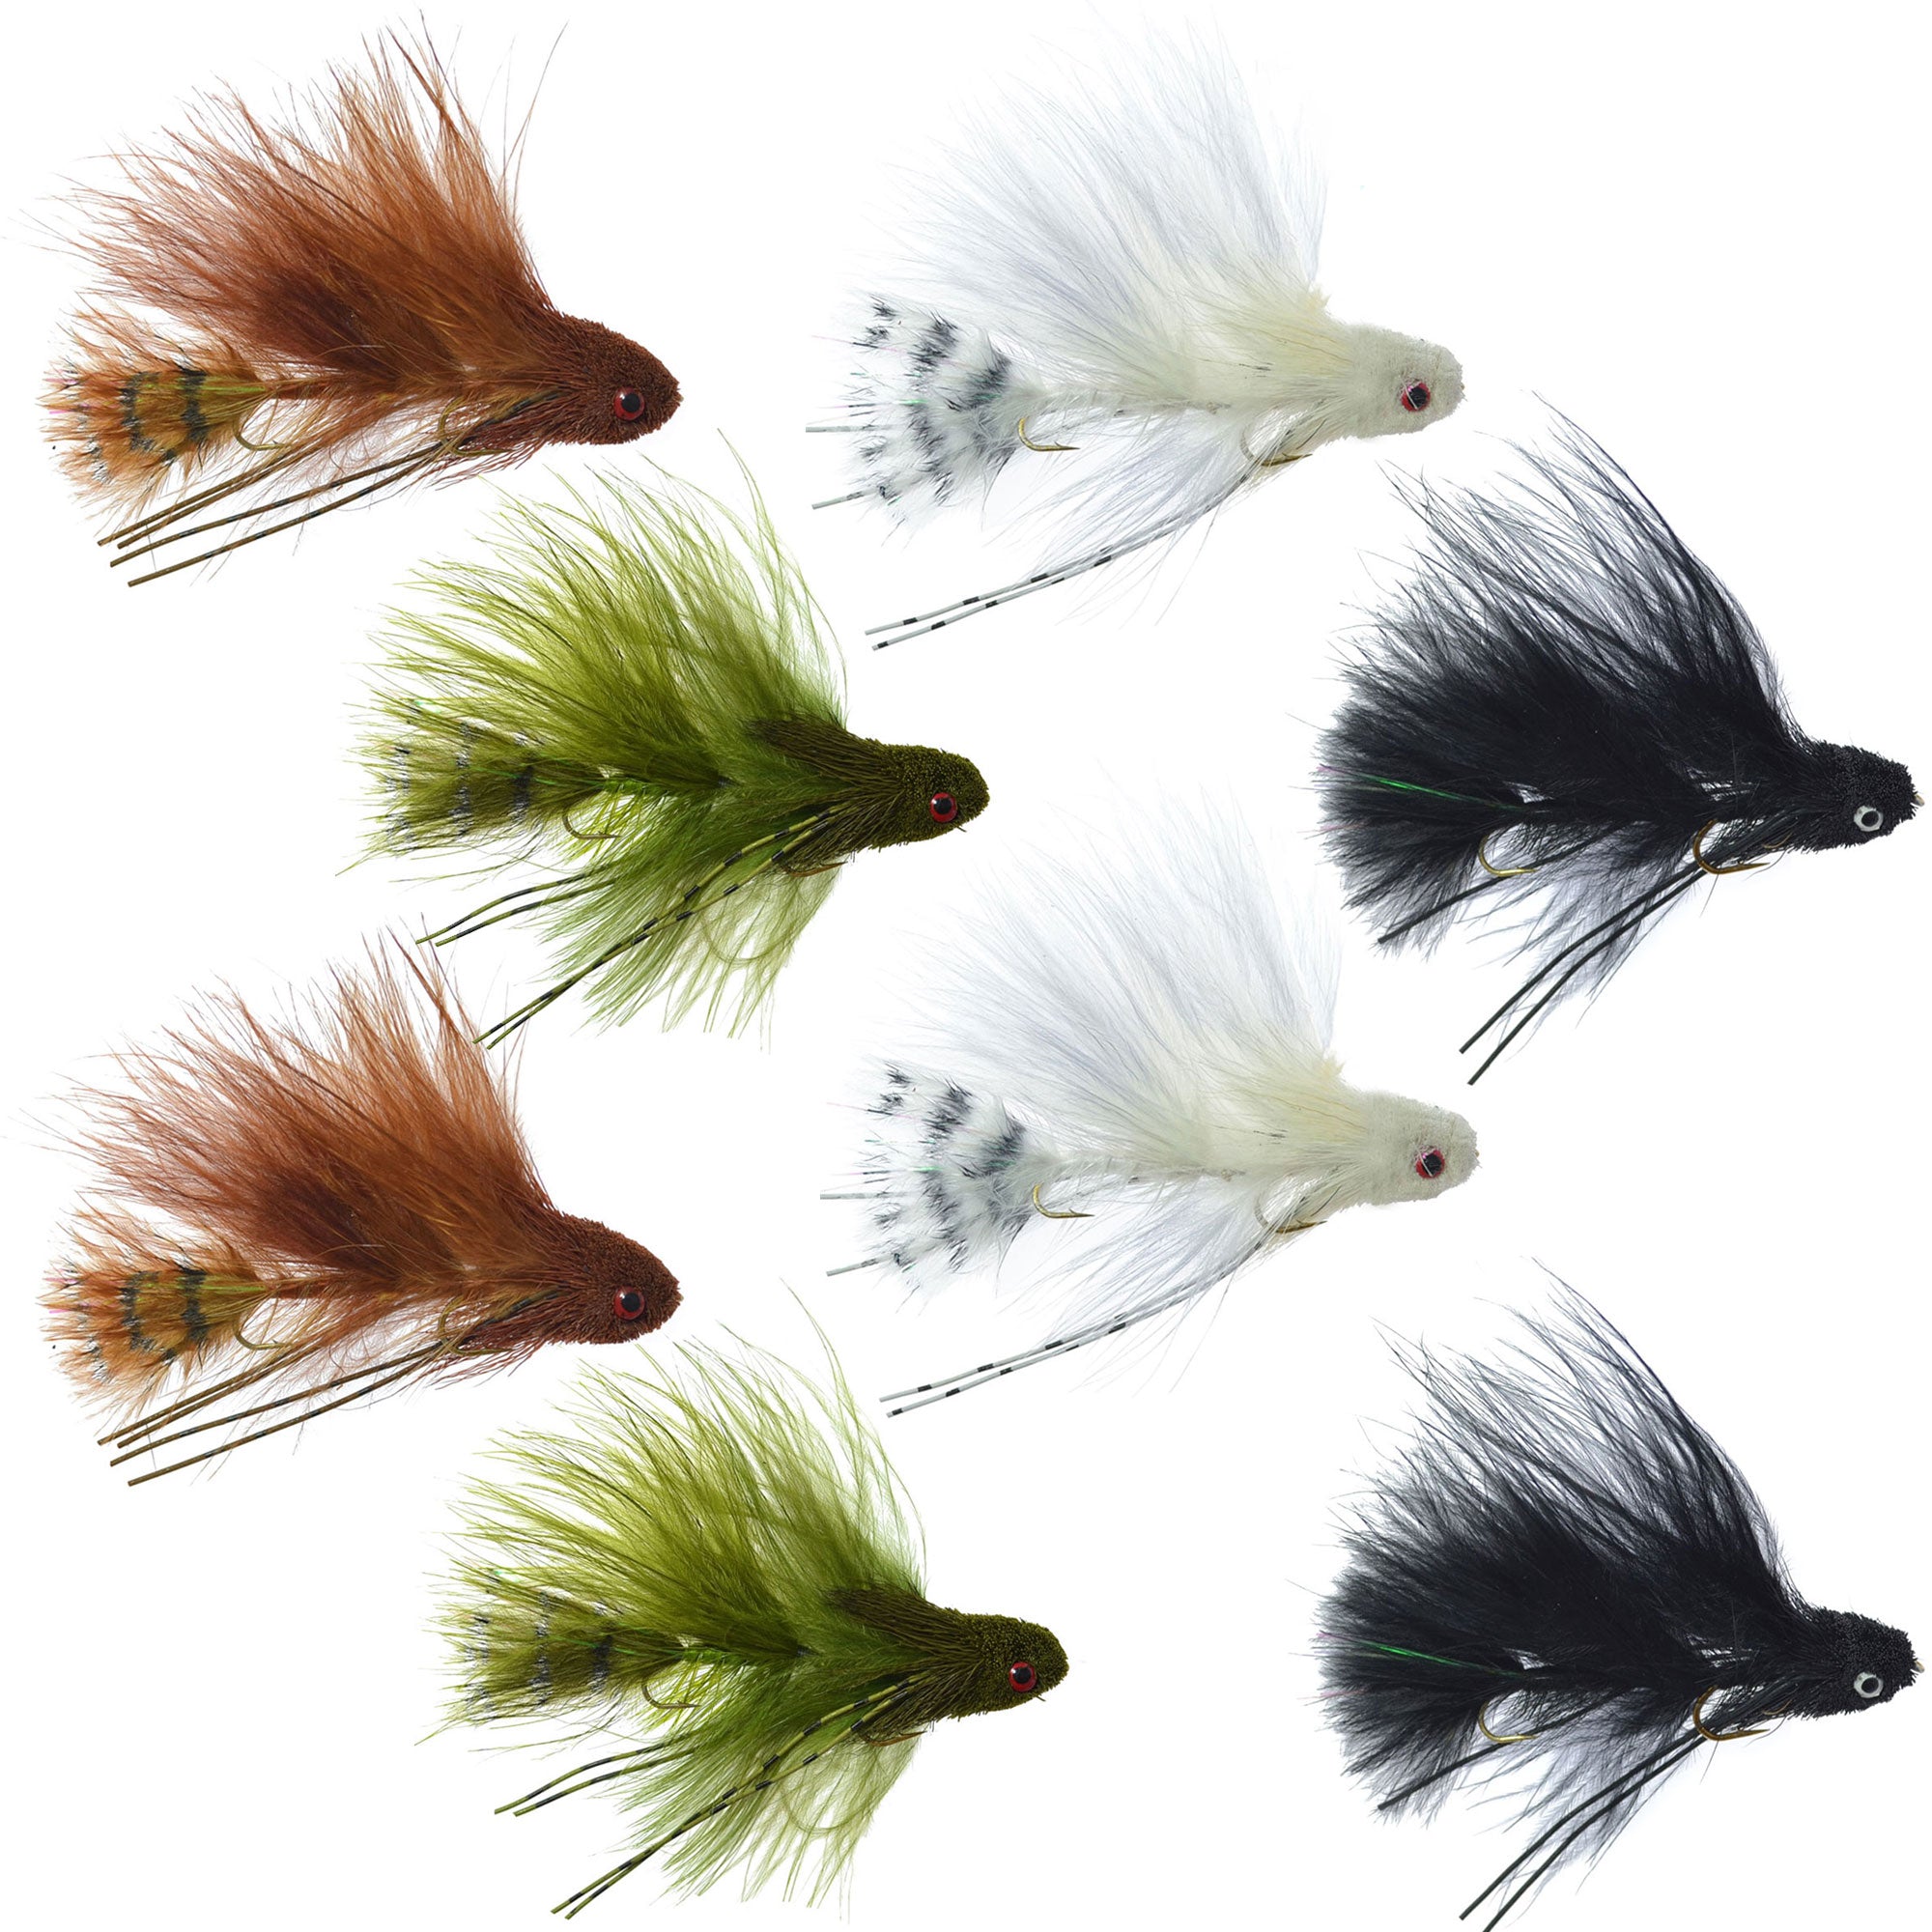 Bunblic Fly Fishing Flies Barbless Fly Hooks 6pcs Include Flies Nymphs Streamers For Trout Salmon Steelhead Fishing - 14 Other